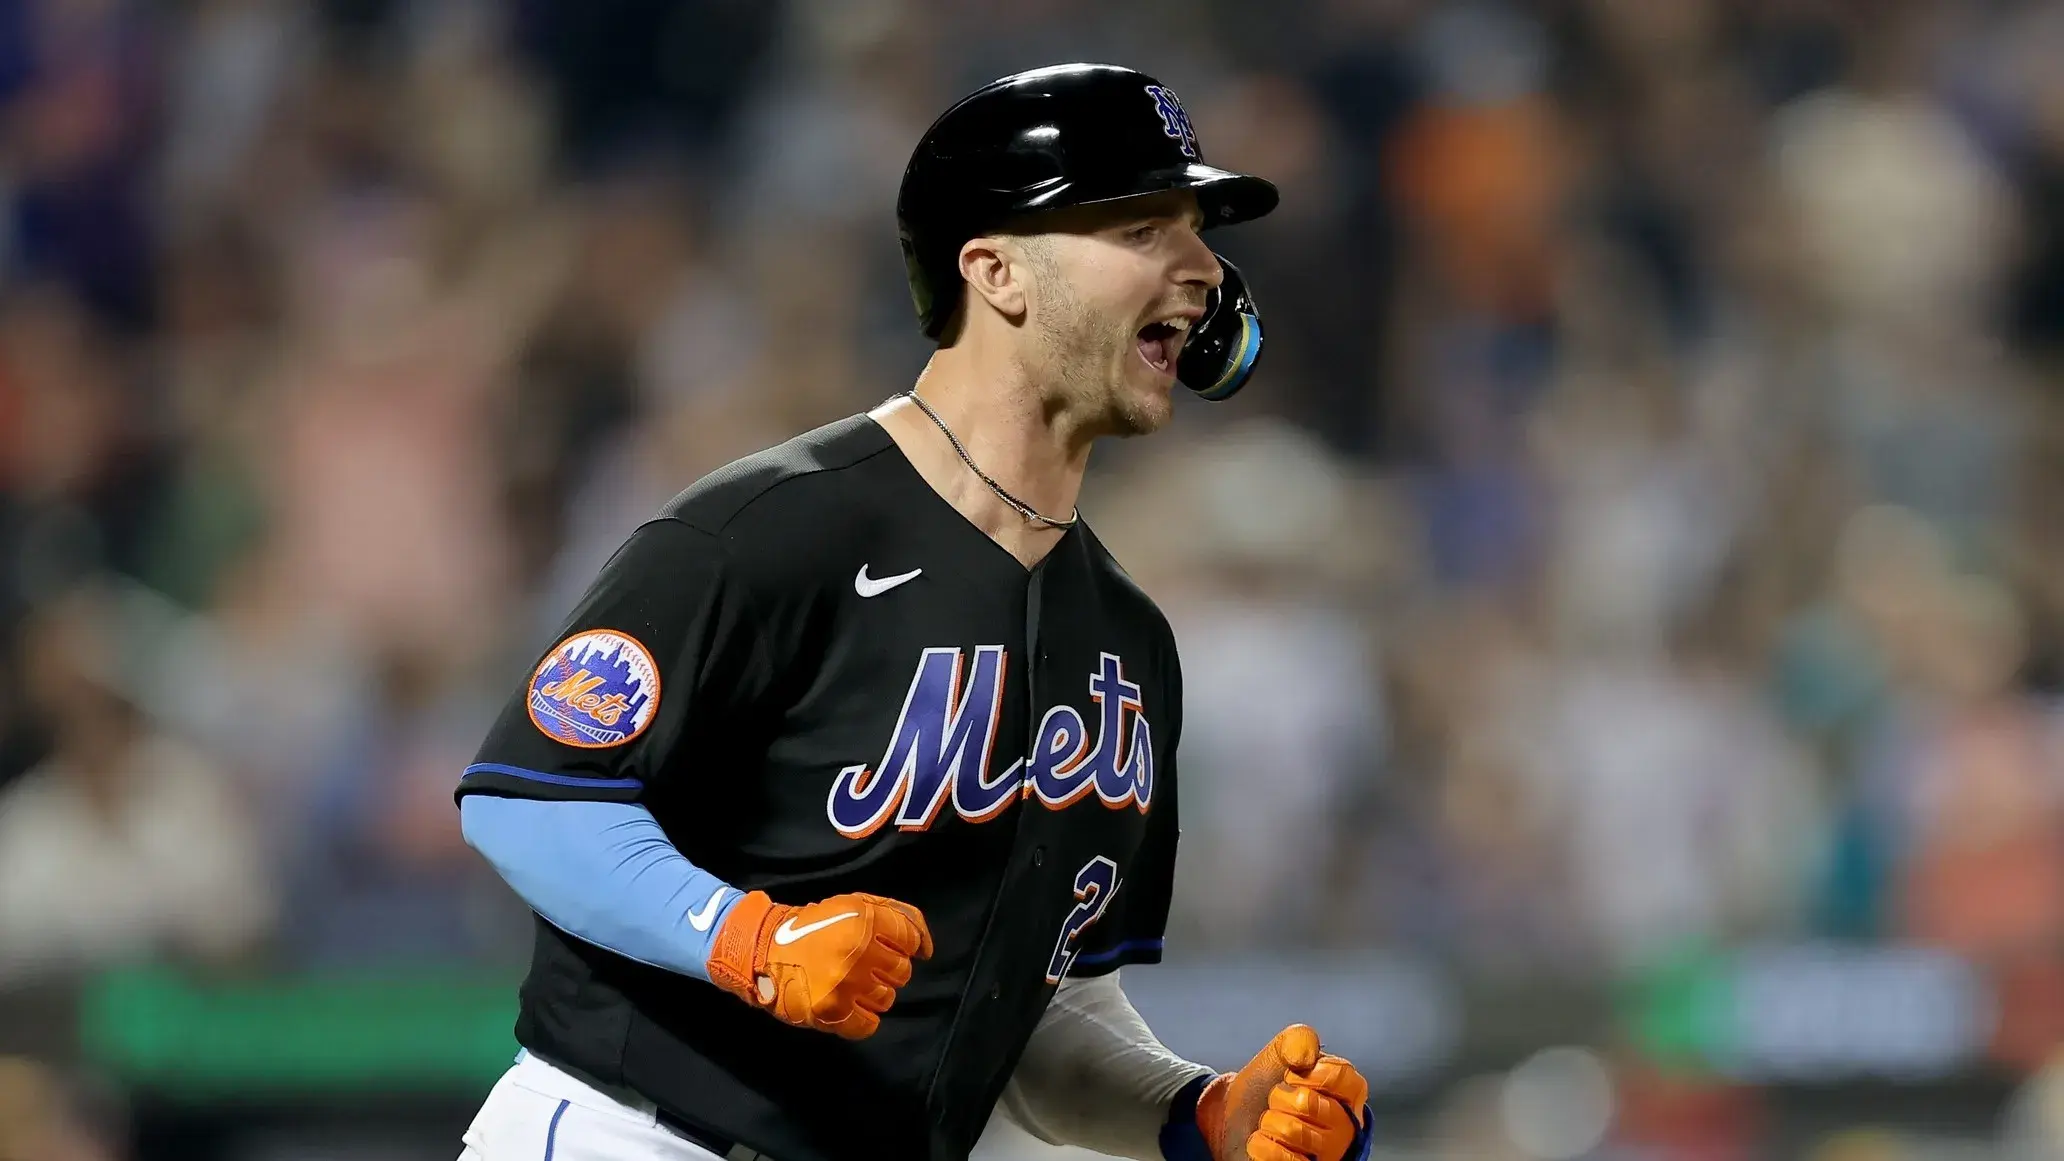 New York Mets first baseman Pete Alonso (20) reacts after hitting a two run home run against the Washington Nationals during the seventh inning at Citi Field. The home run was his second of the game. / Brad Penner-USA TODAY Sports